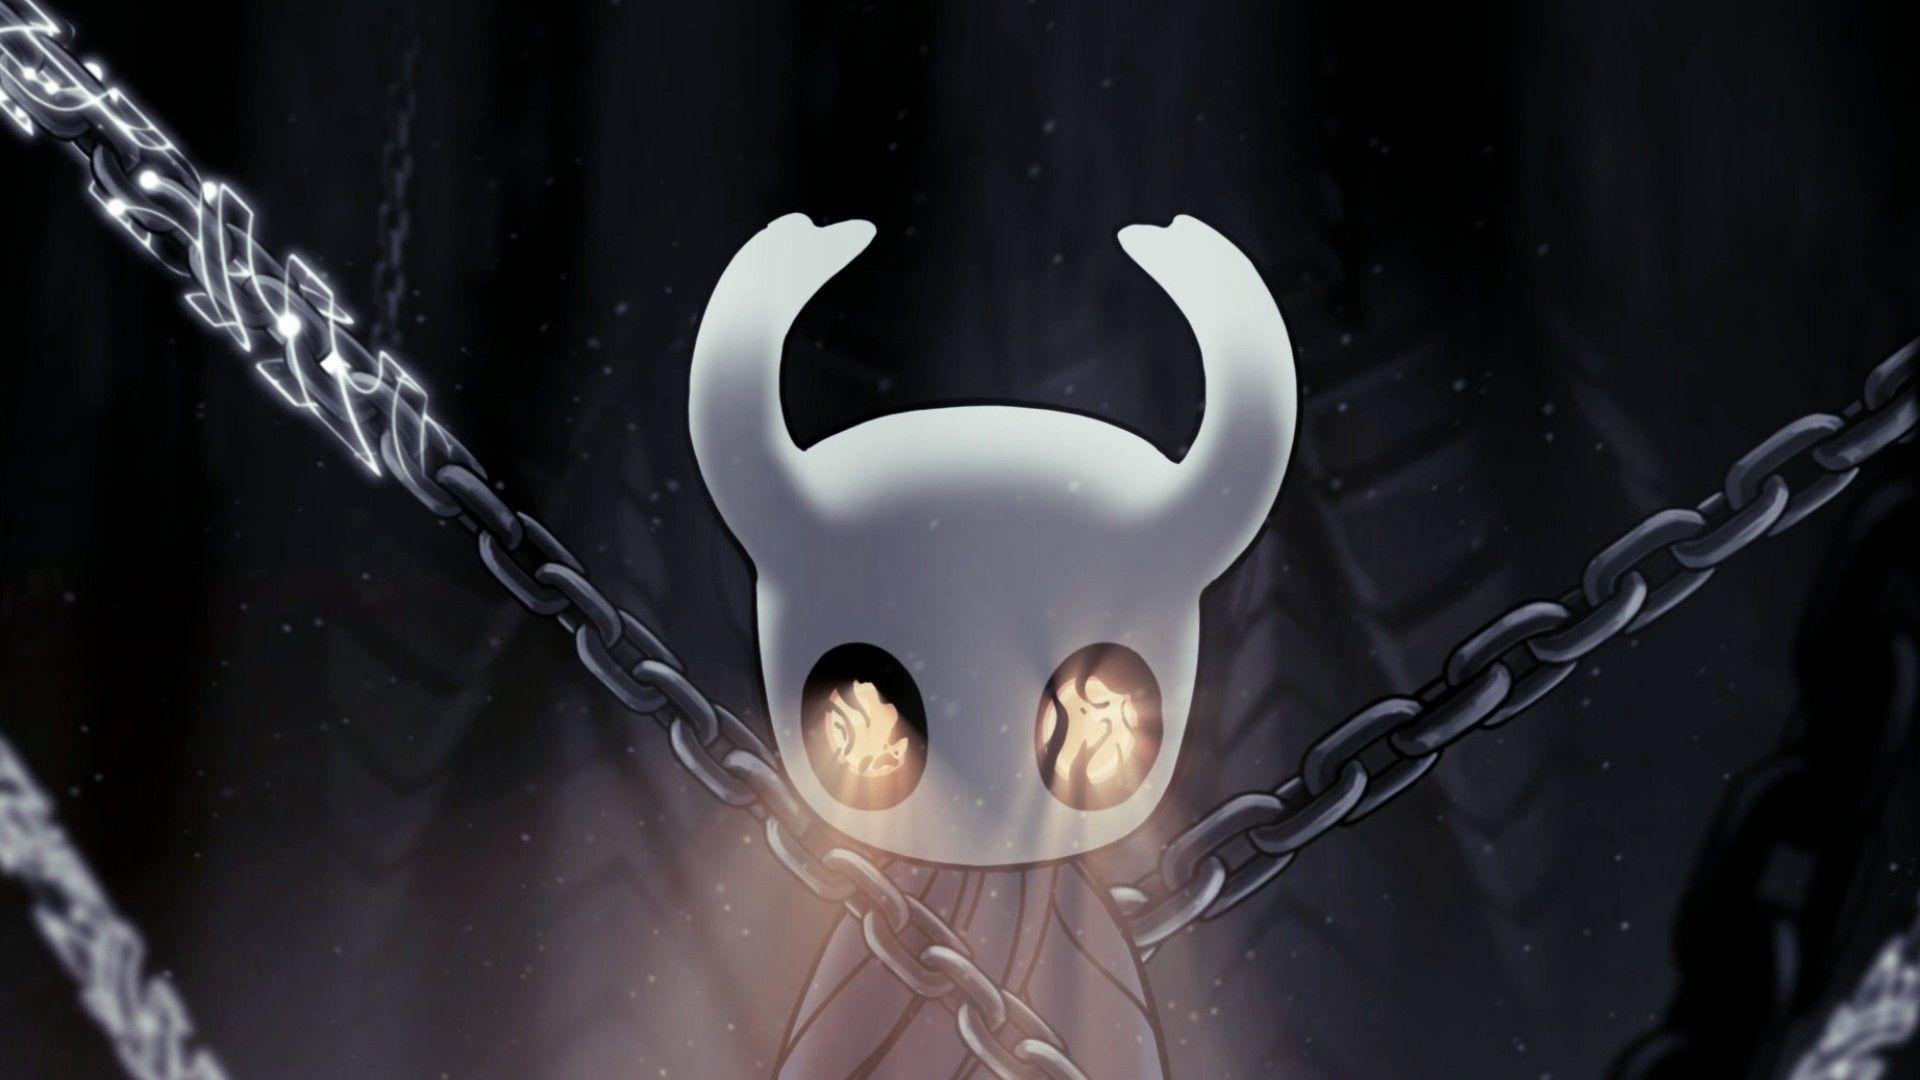 Hollow Knight Wallpapers - Top Free Hollow Knight Backgrounds